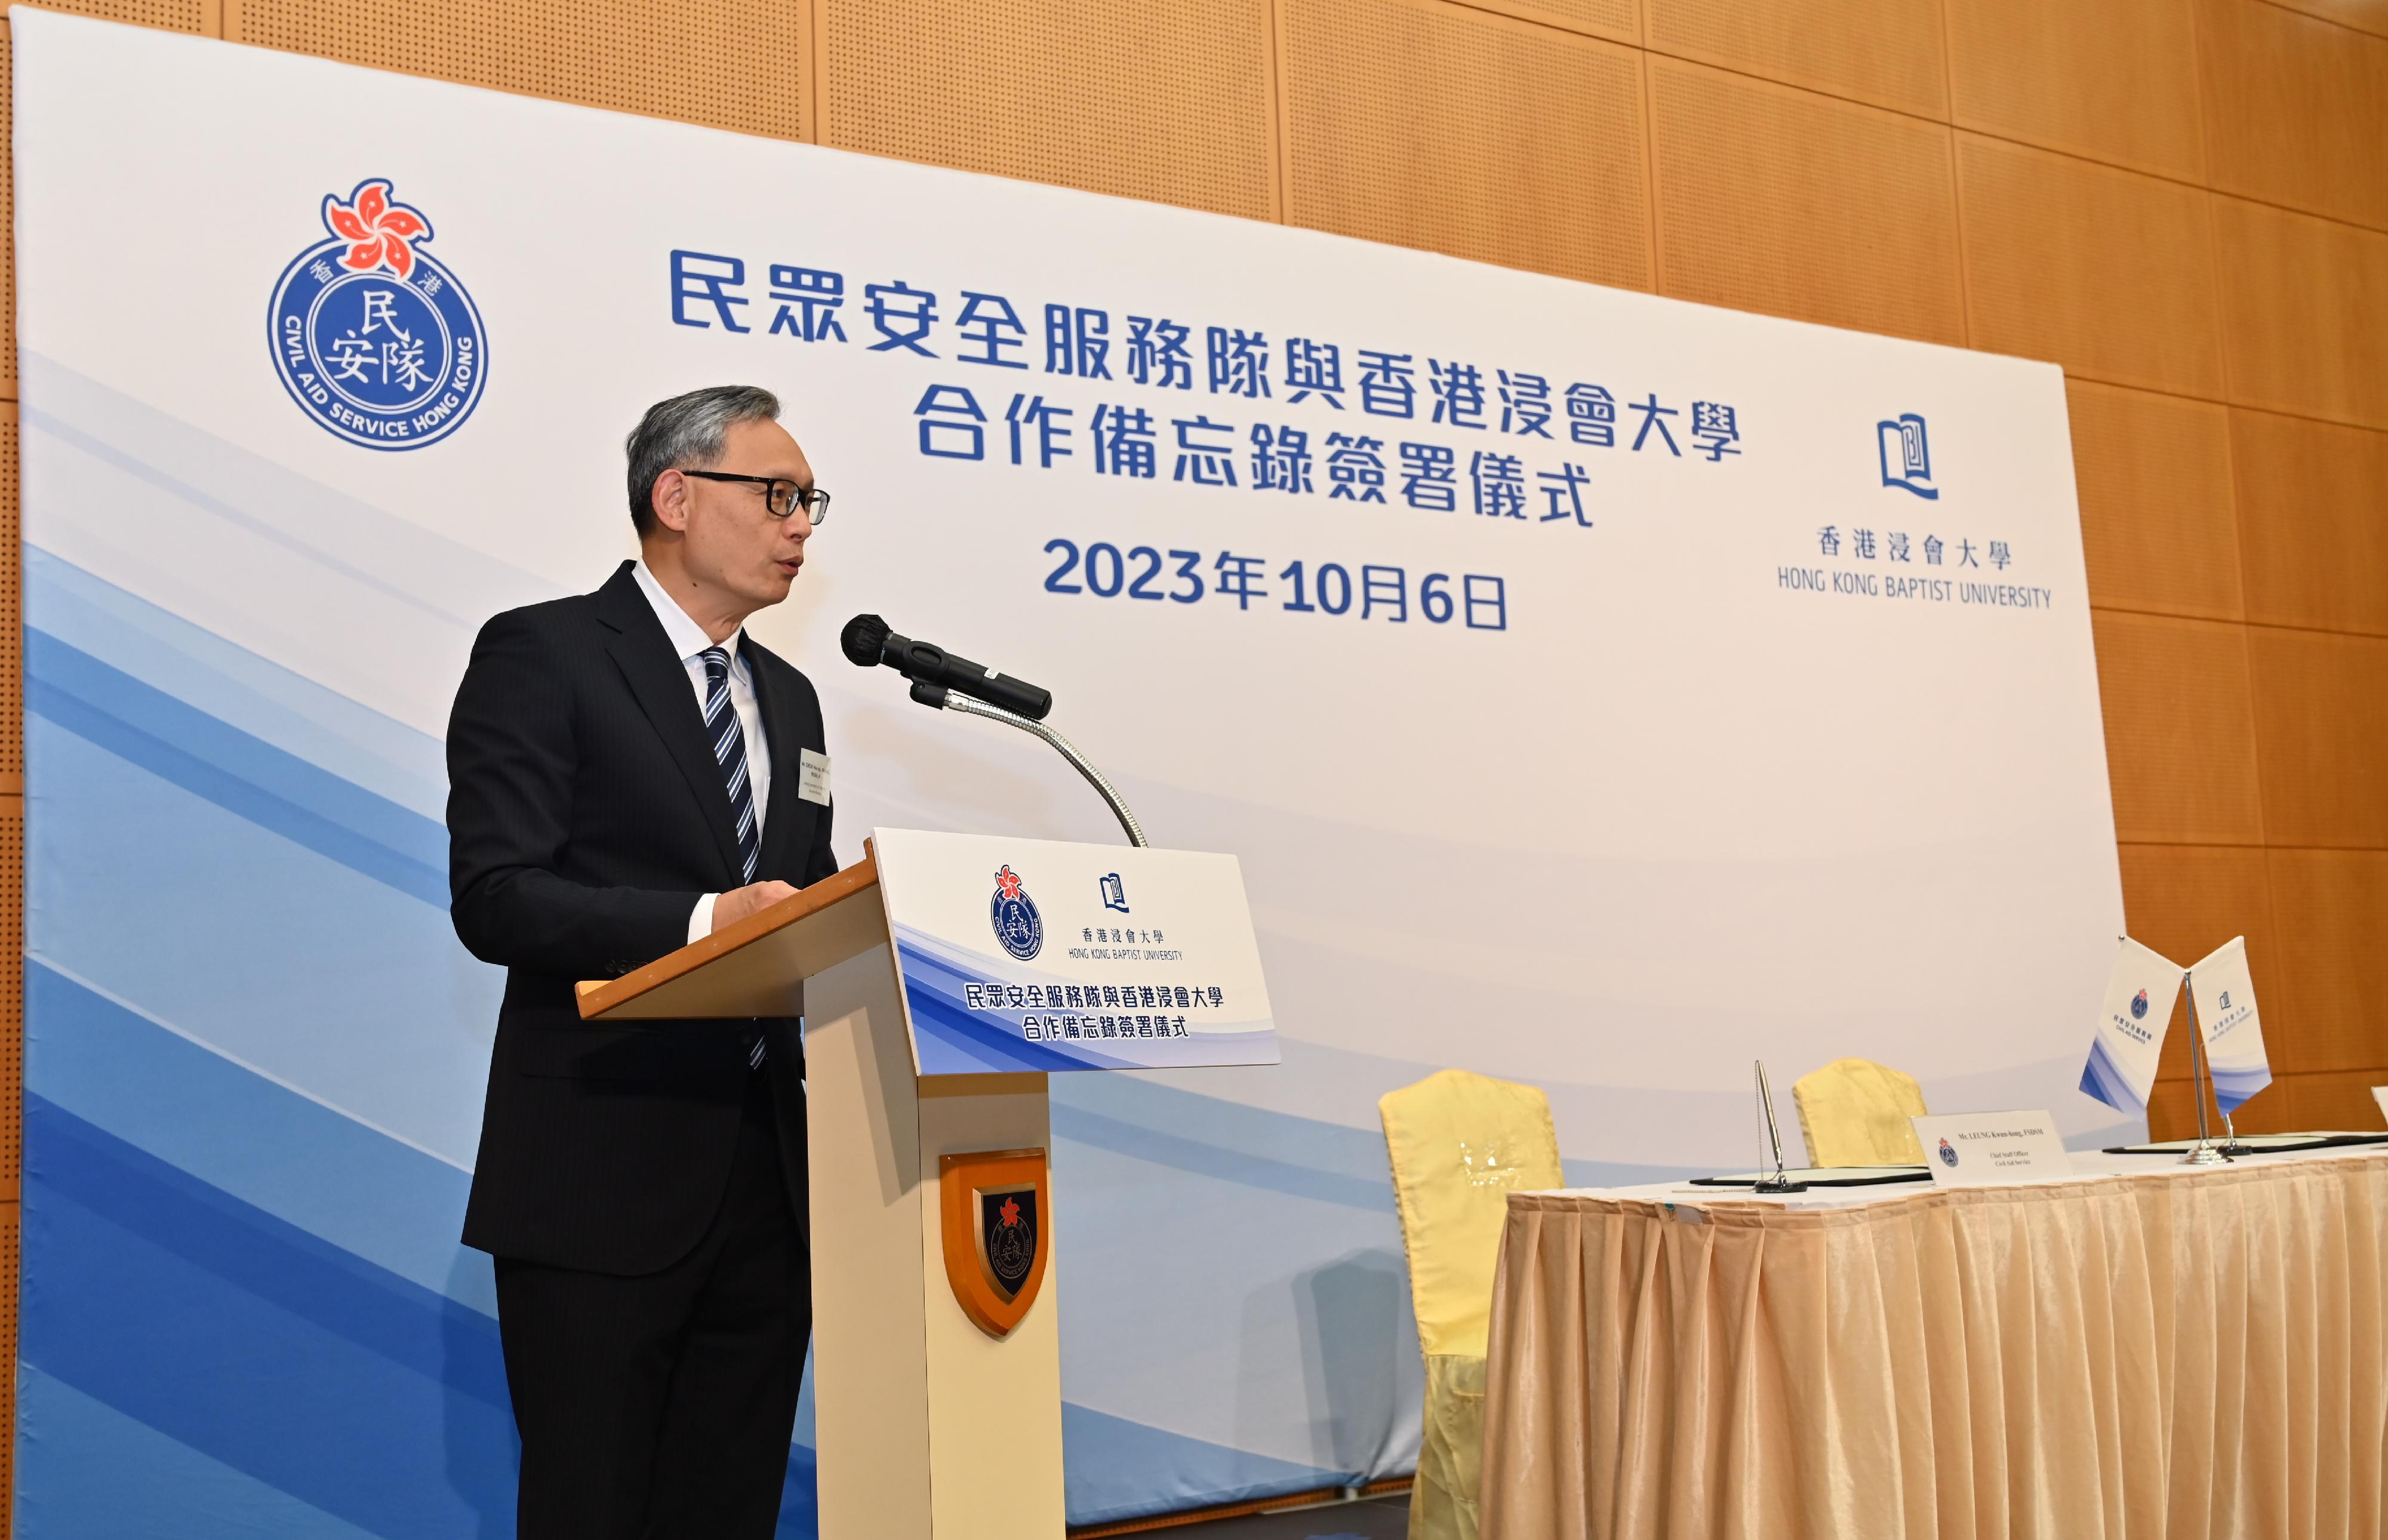 The Civil Aid Service (CAS) and Hong Kong Baptist University (HKBU) signed a Memorandum of Understanding today (October 6) to underpin a closer collaboration. Photo shows the Acting Secretary for Security, Mr Michael Cheuk, delivering a speech at the signing ceremony.